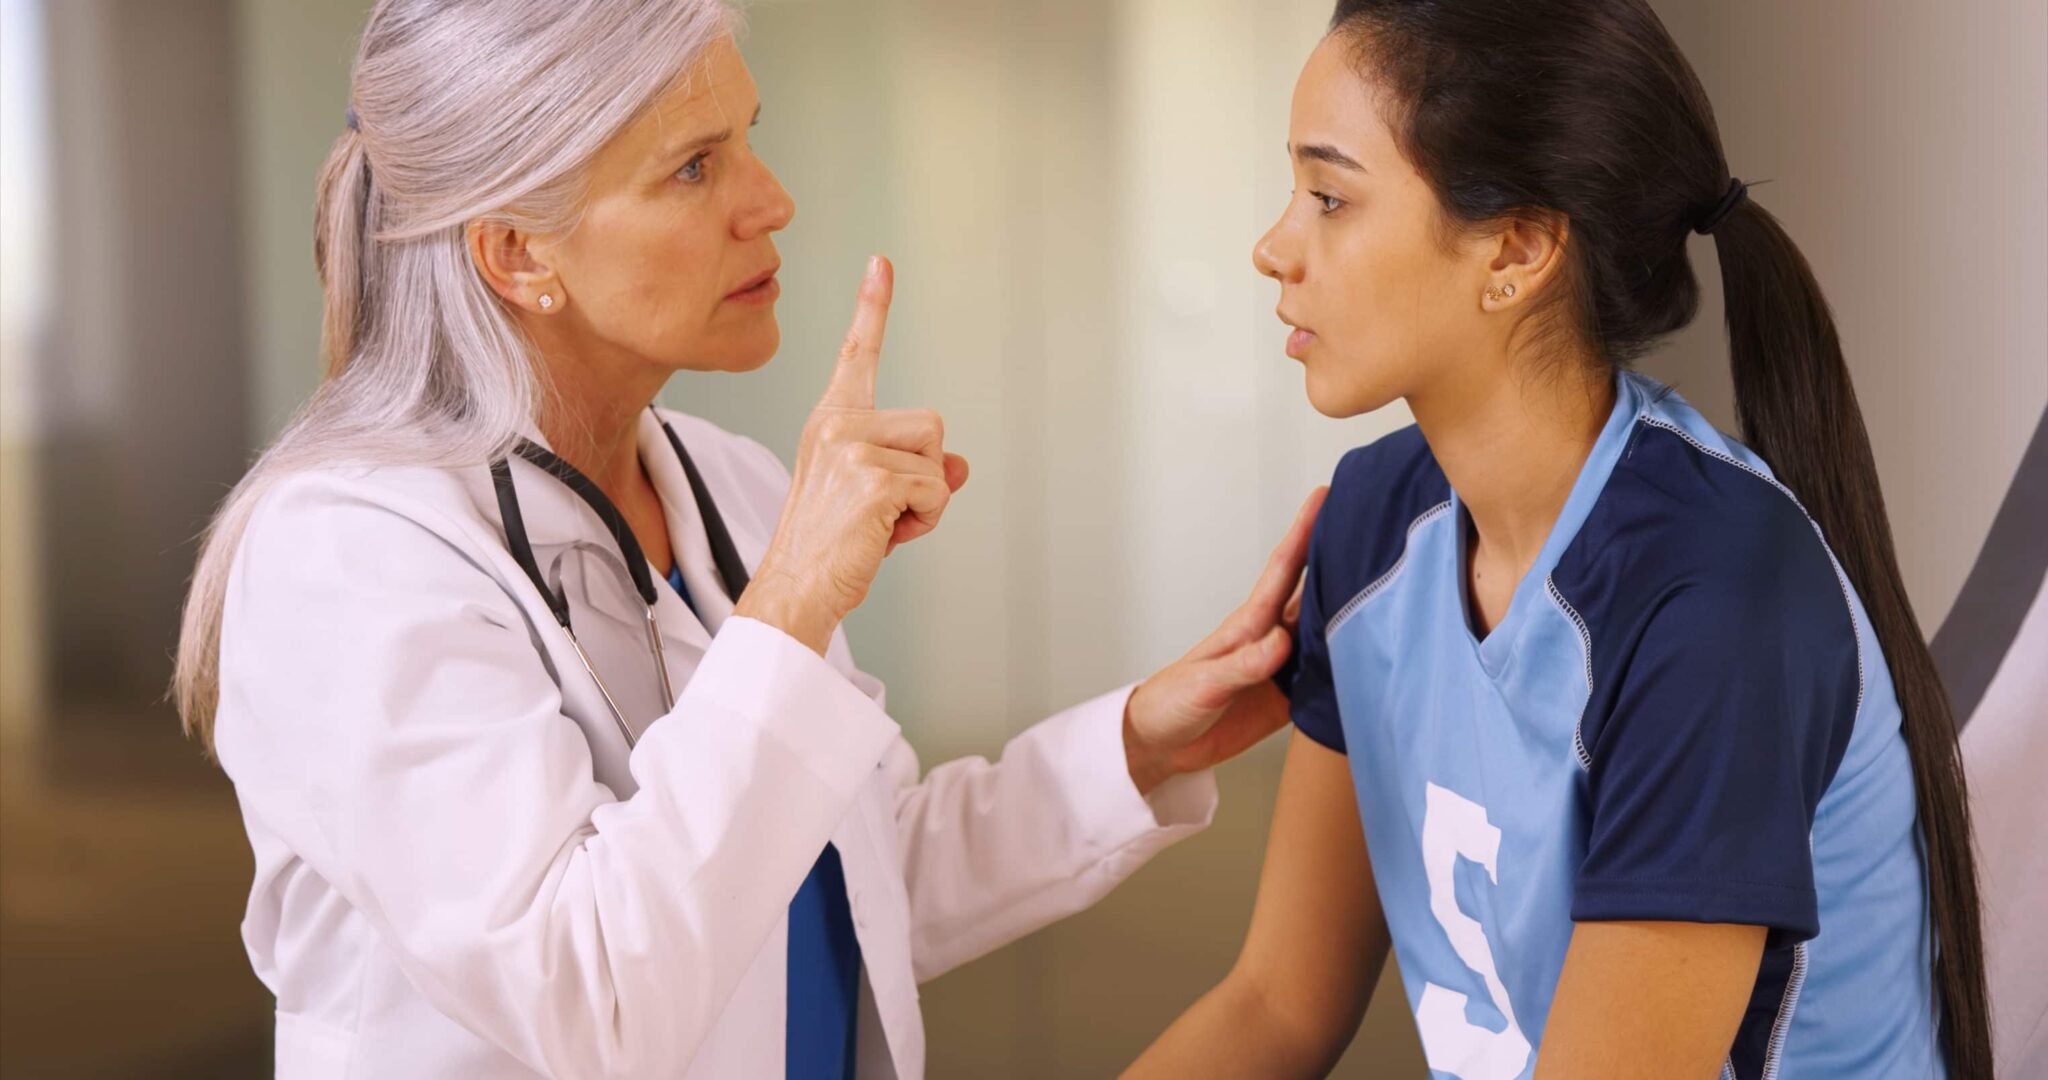 Doctor advising young woman